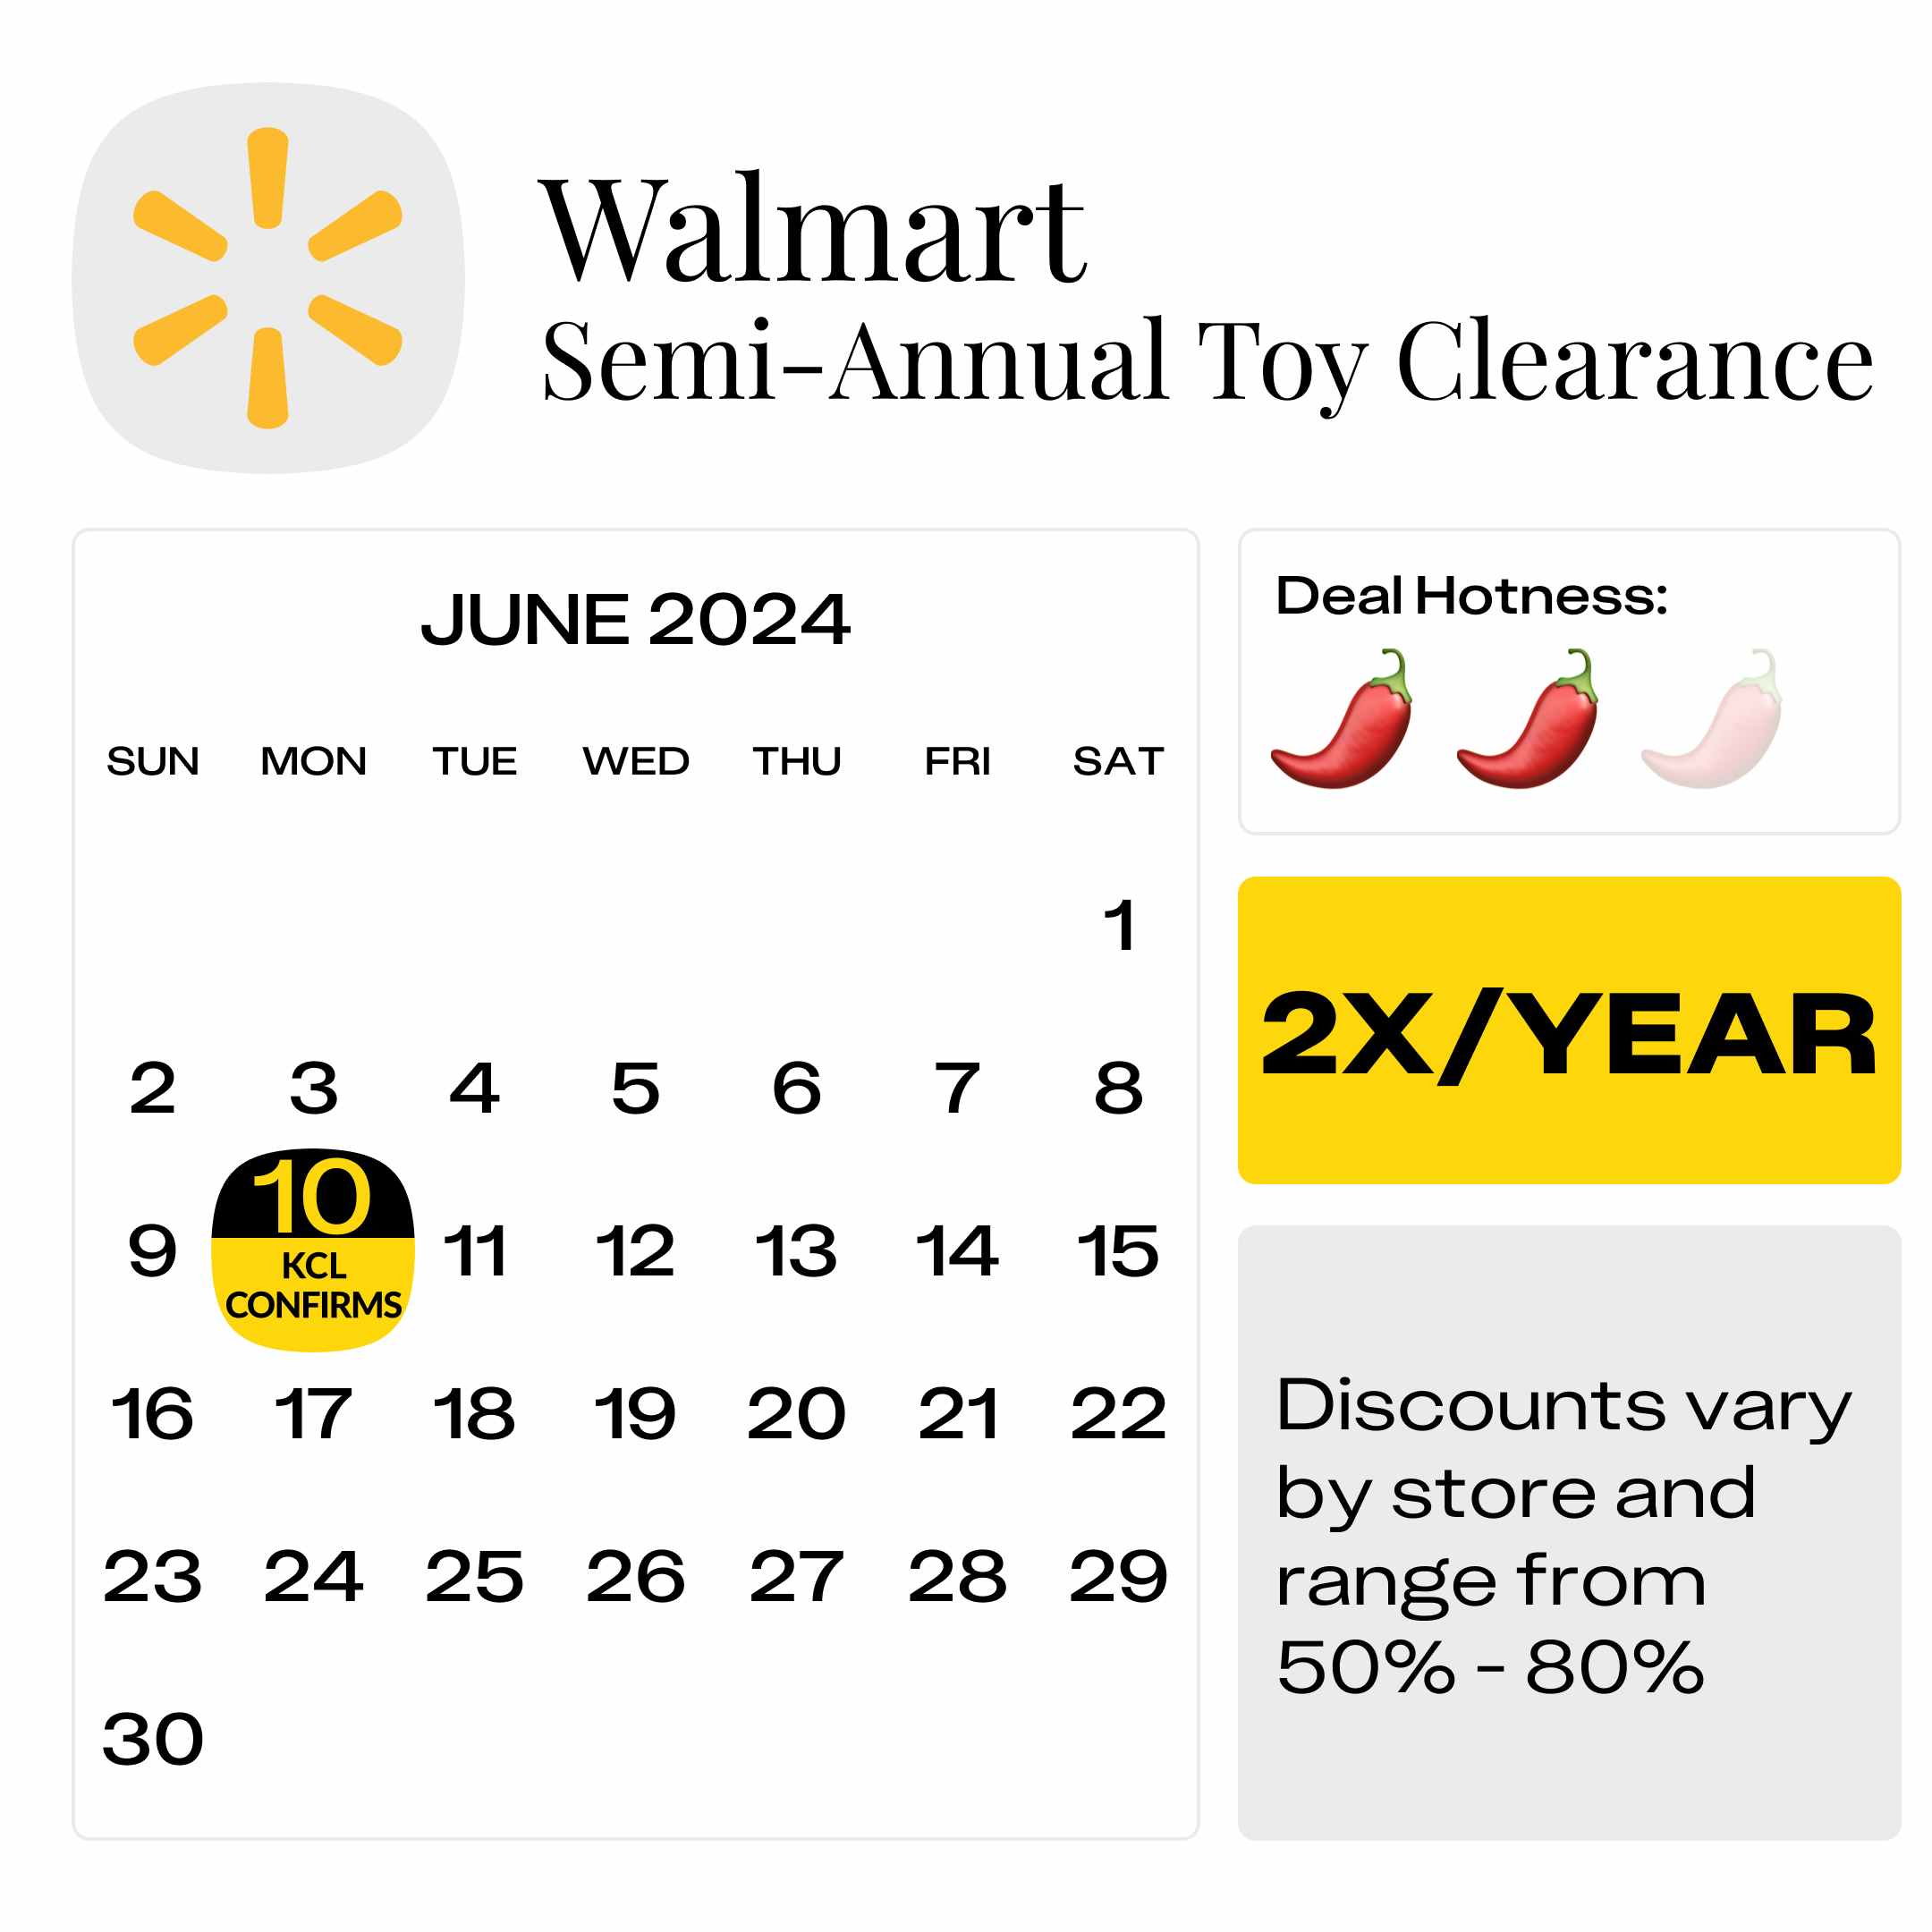 Start date in June 2024 for the Semi-Annual Walmart Toy Clearance Sale.